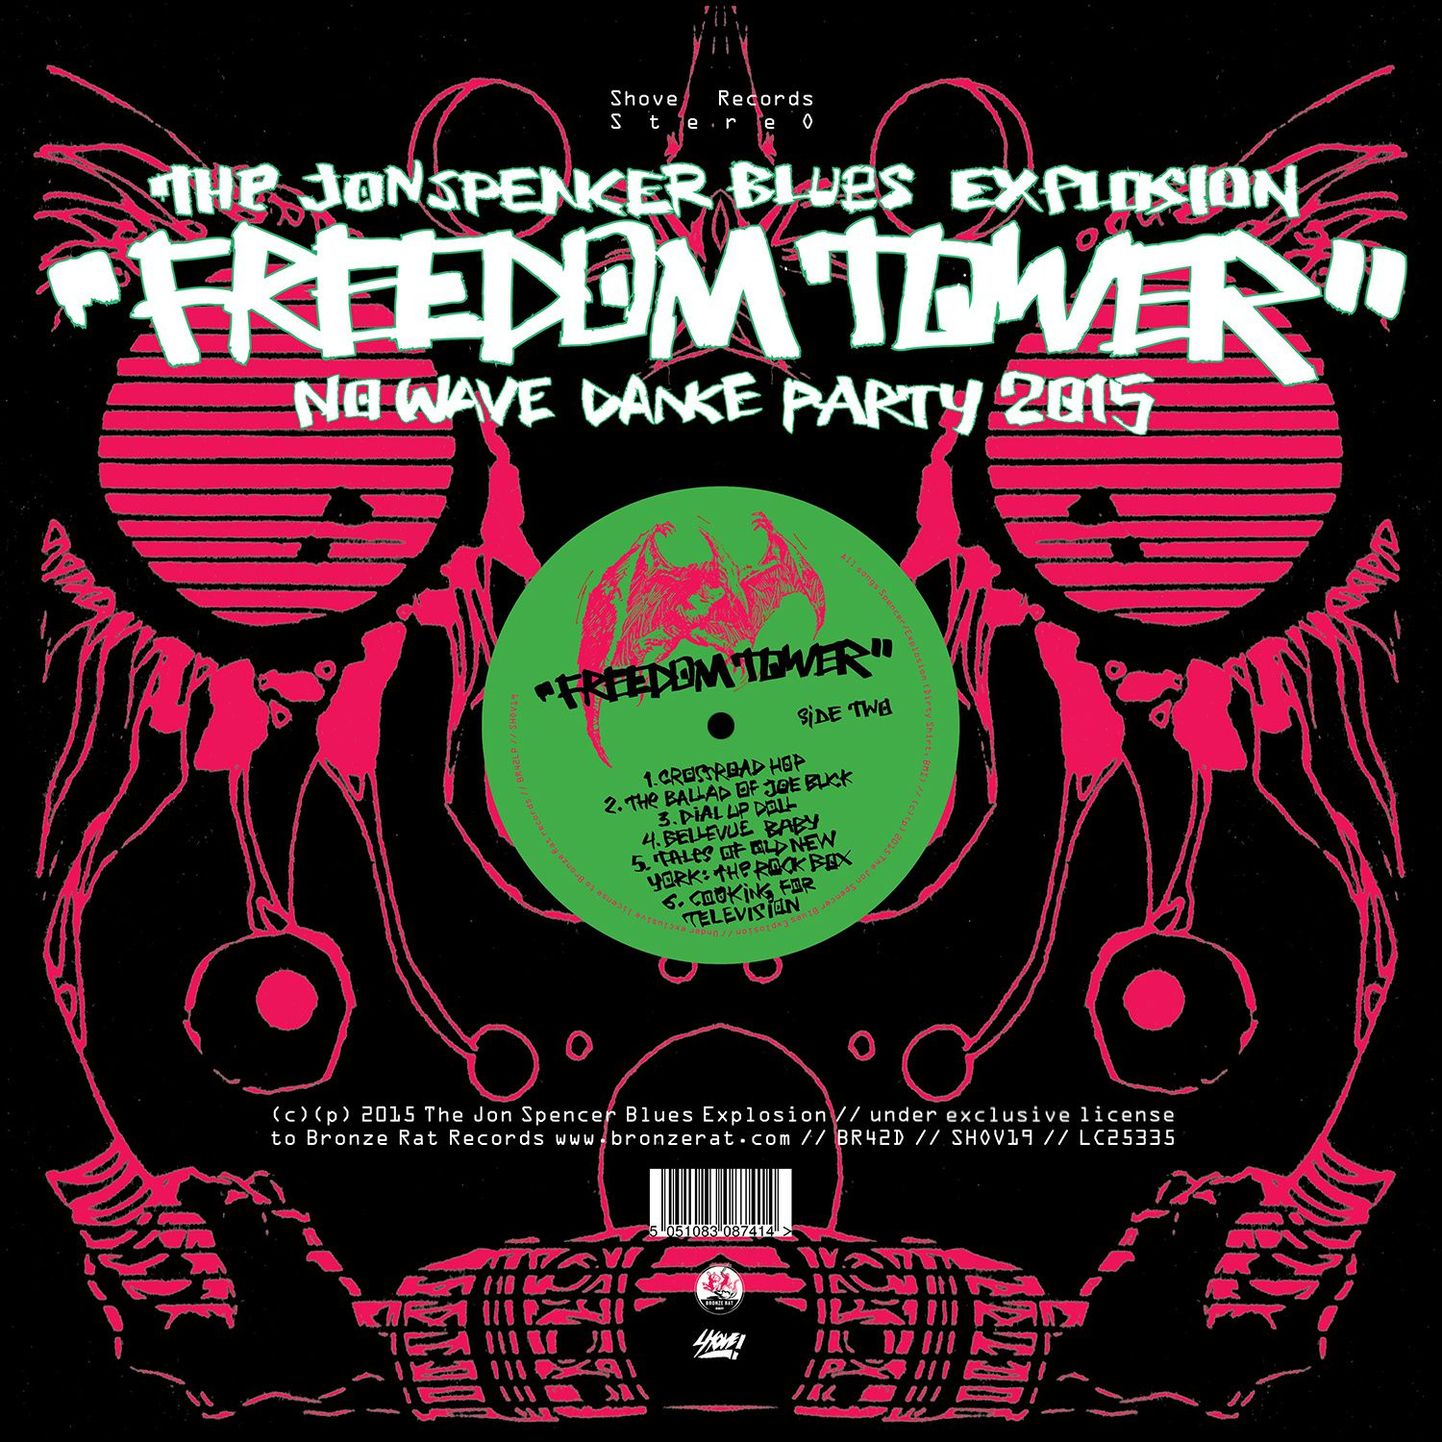 Jon Spencer Blues Explosion- Freedom Tower: No Wave Dance Party